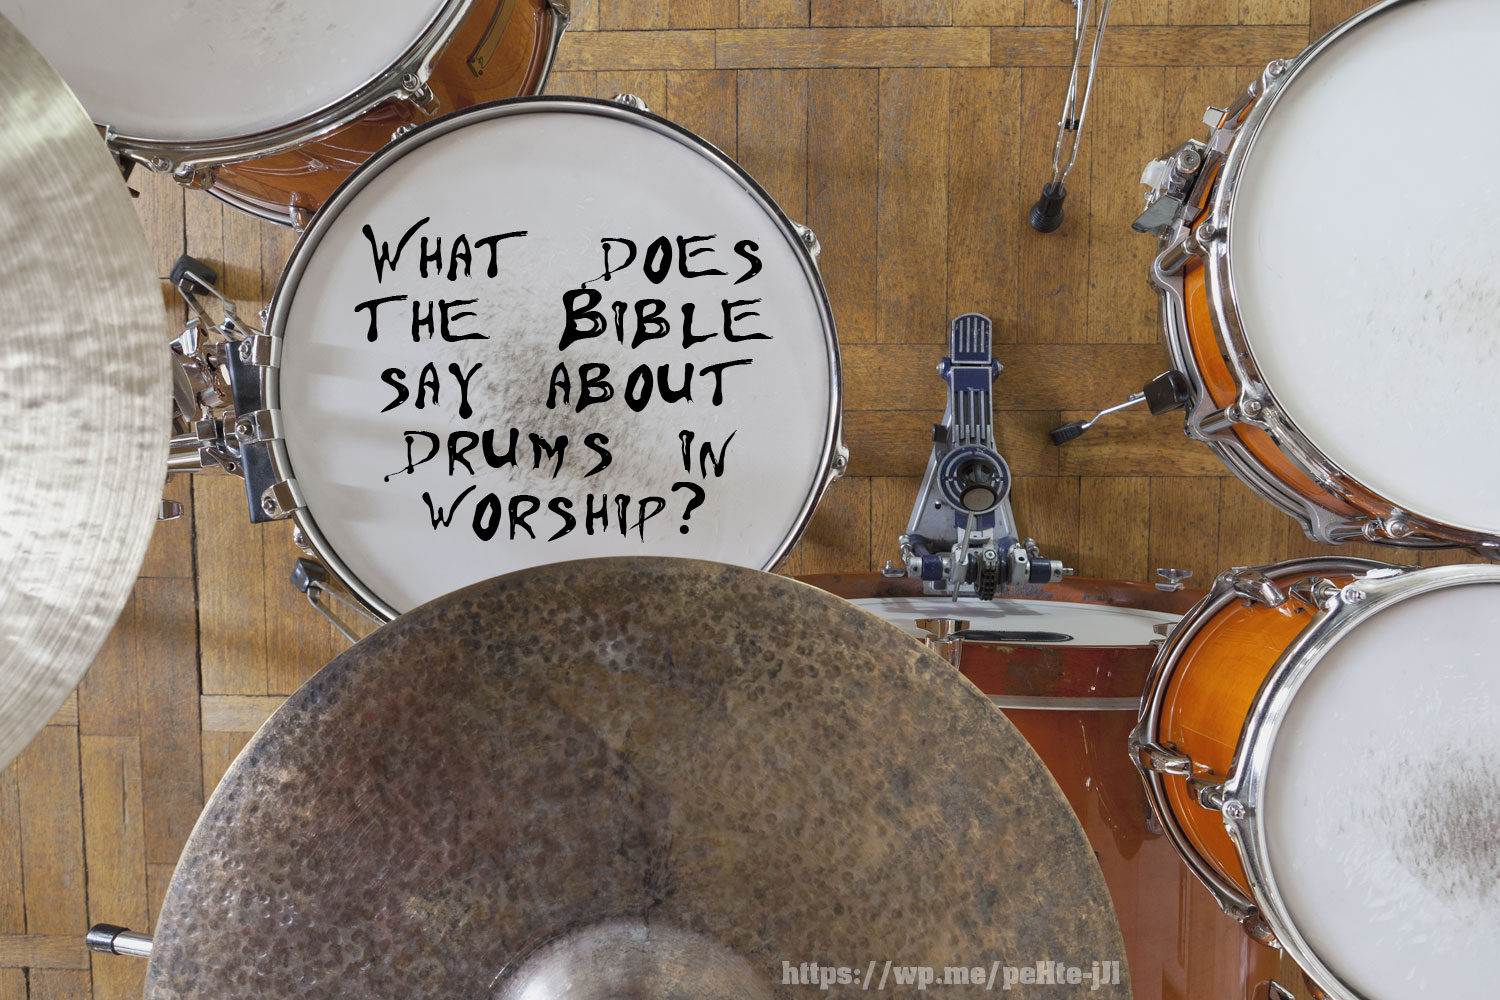 What does the Bible say about drums in worship? Can we use drums in our worship to the Lord? #Drums #bgbg2 #Bible